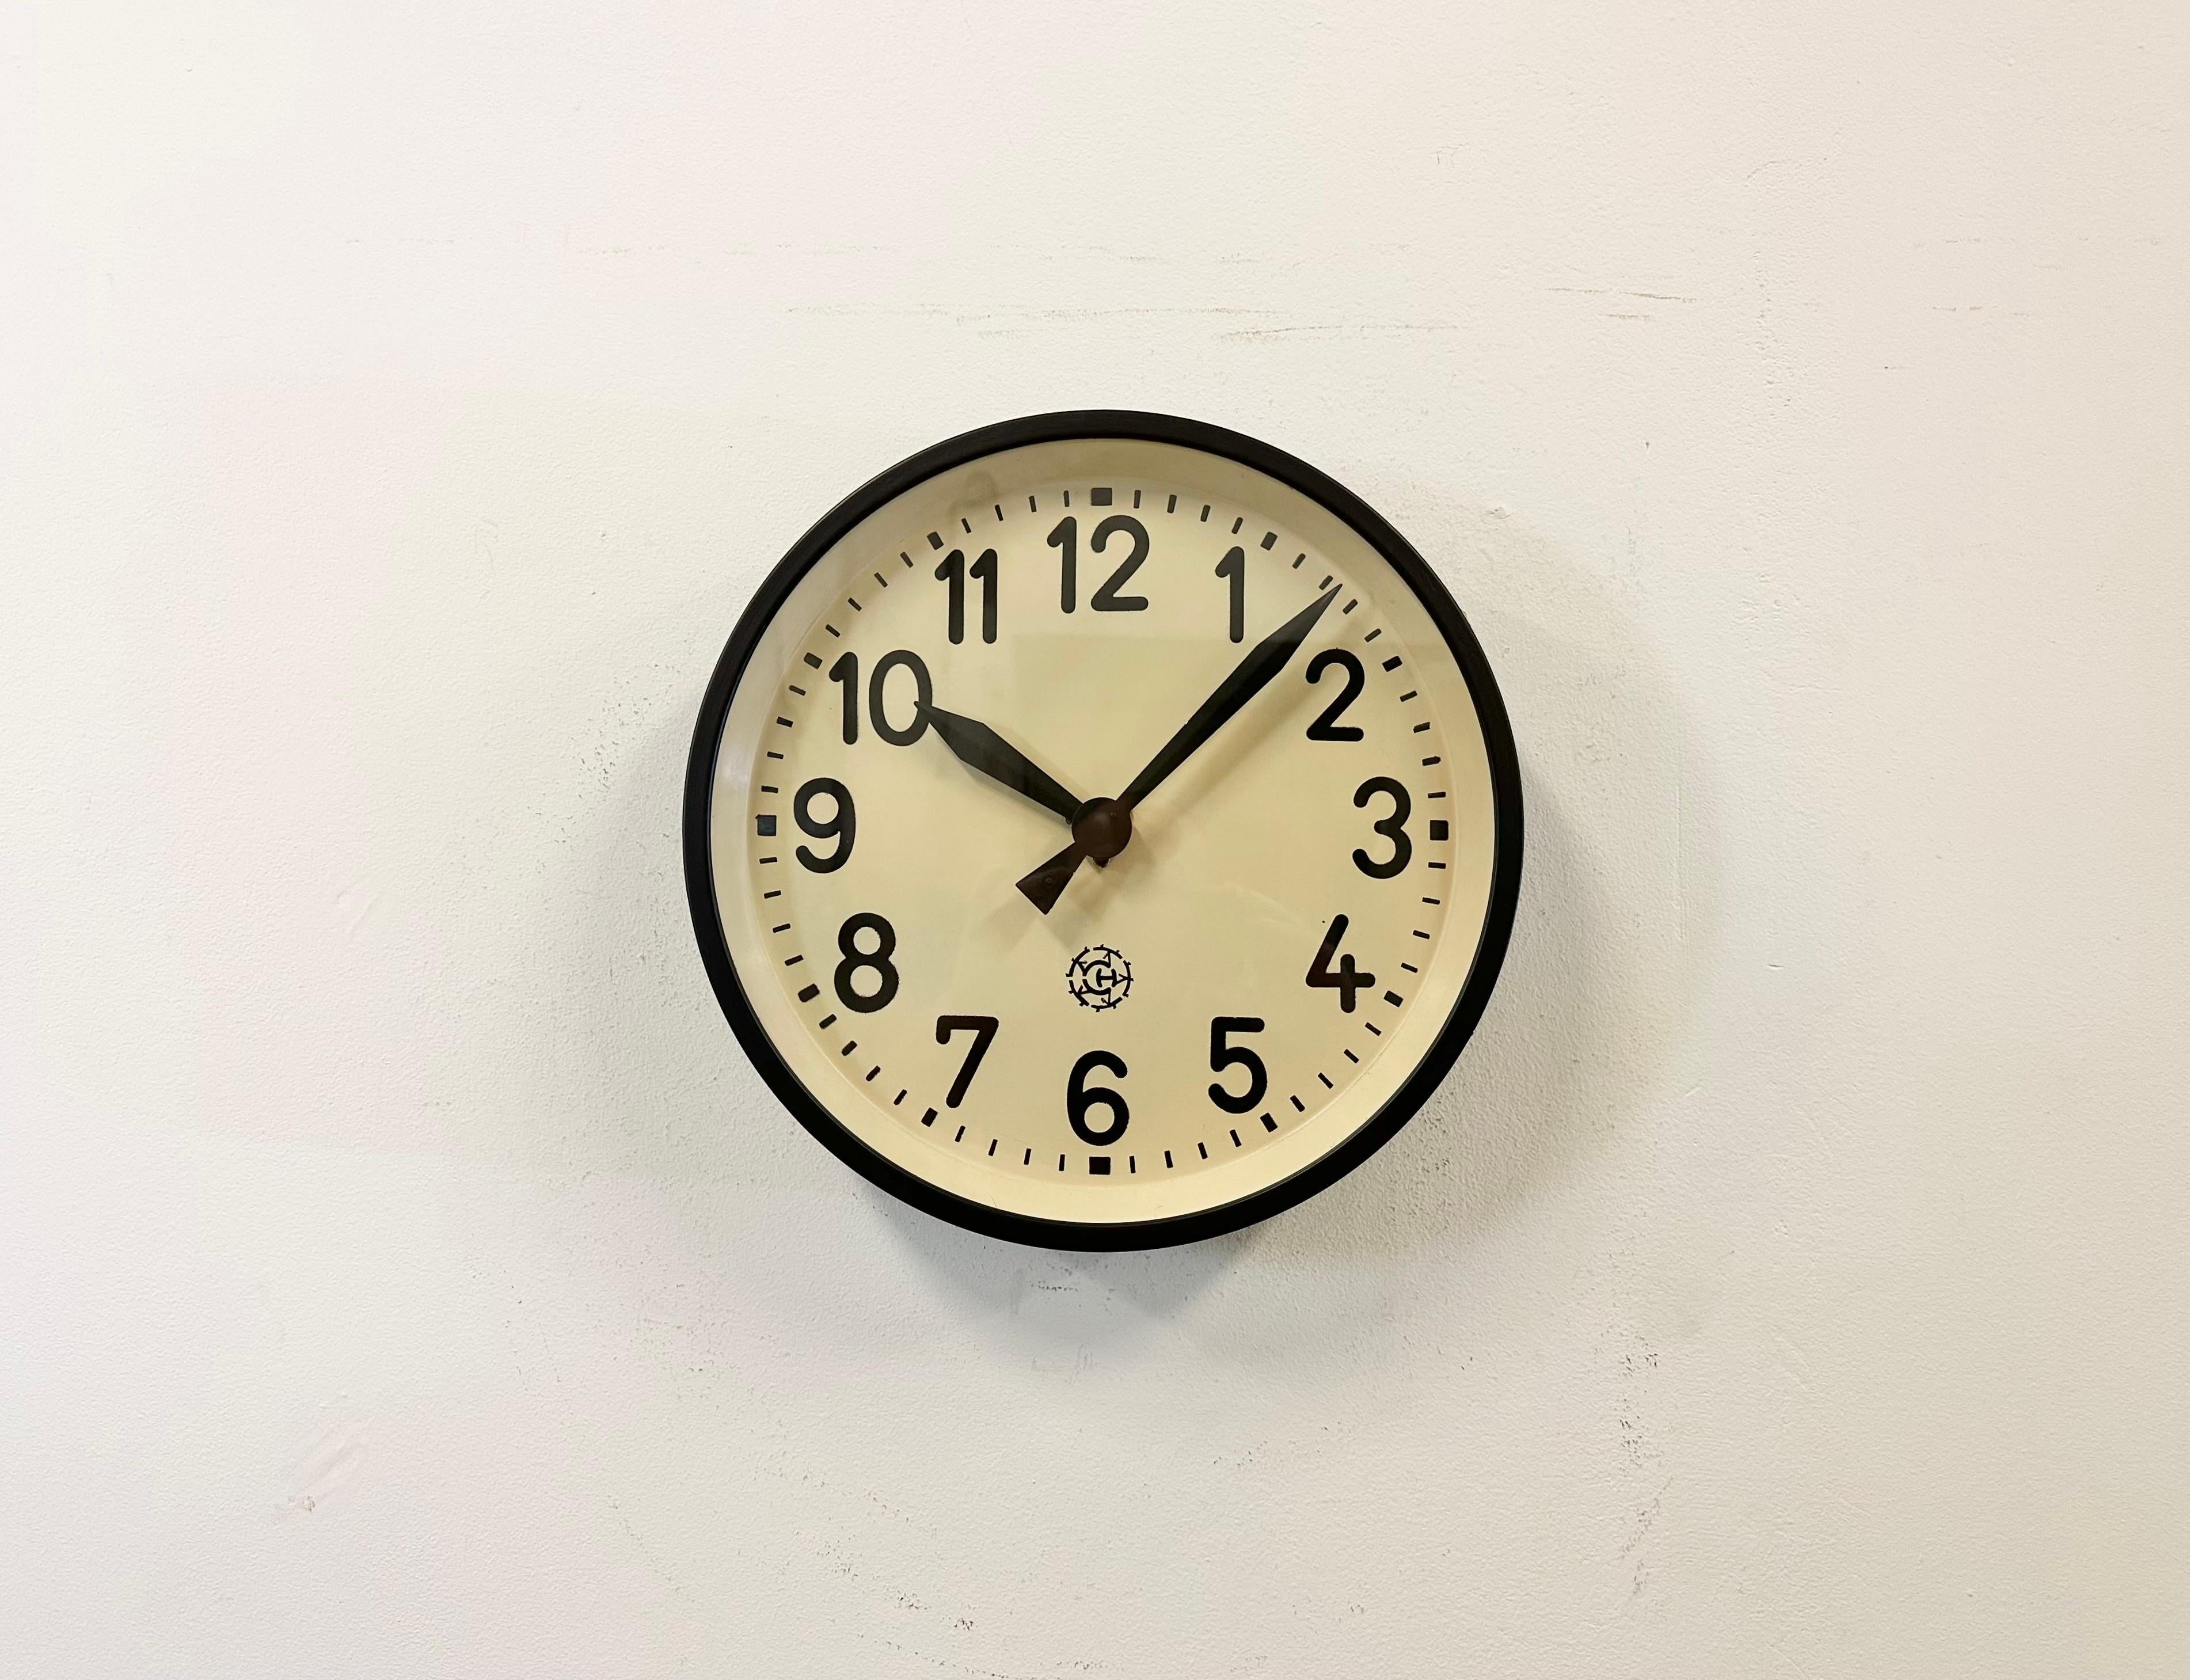 This factory wall clock wad produced by Chronotechna in former Czechoslovakia during the 1950s. It features a newly painted black metal frame, iron dial, aluminum hands and clear glass cover. Former electrical slave clock has been converted into a